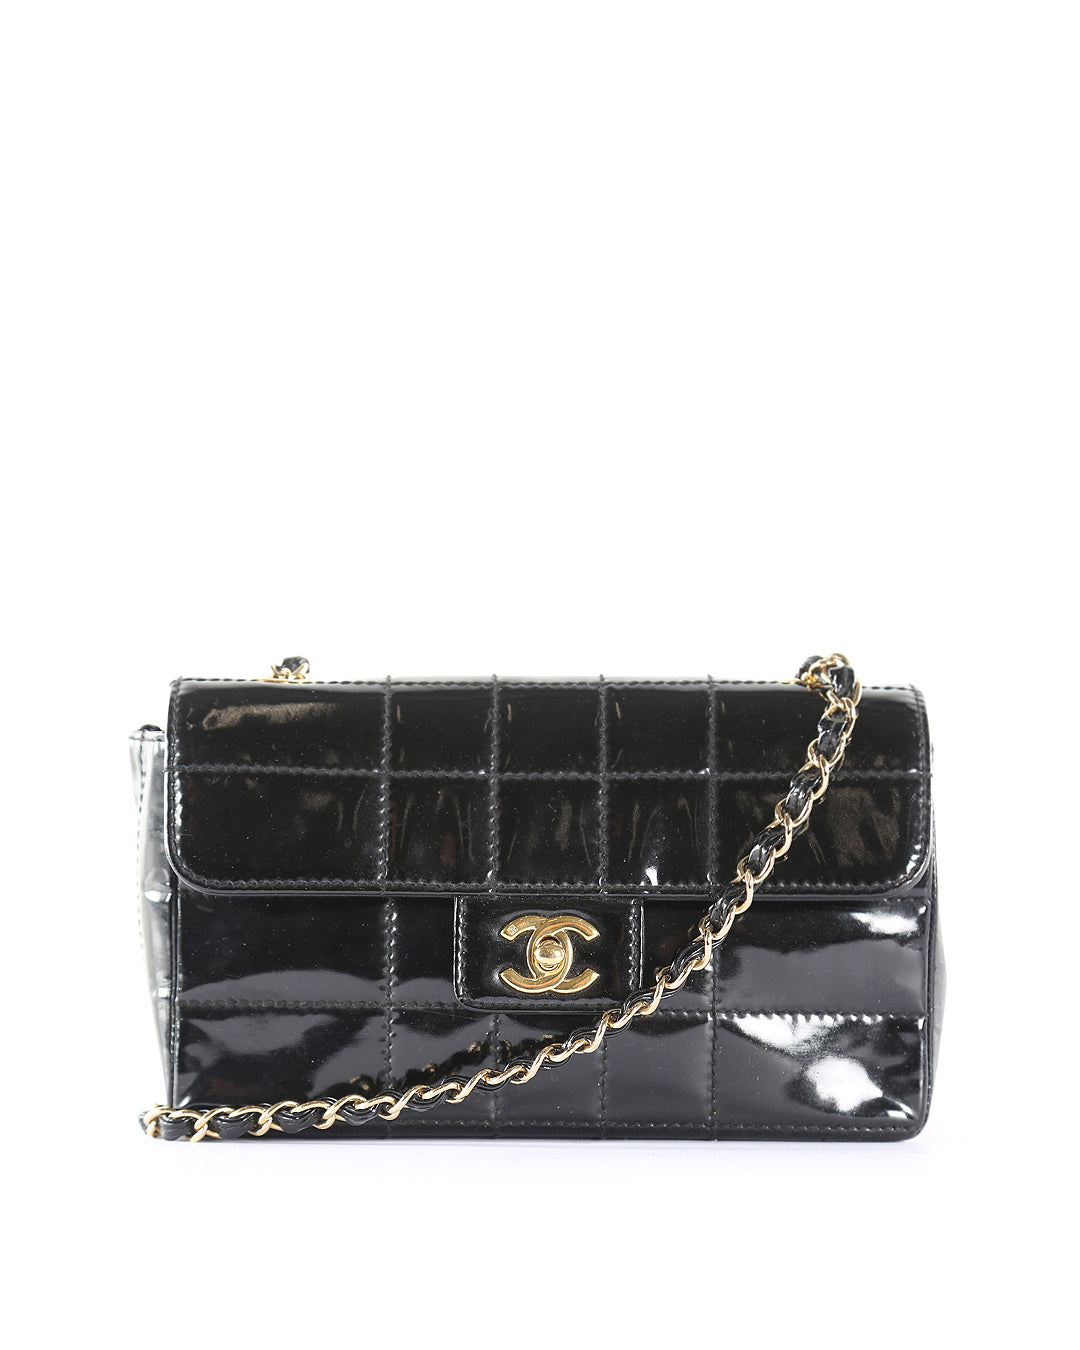 CHANEL Black Patent Leather Quilted Chocolate Bar Shoulder Bag